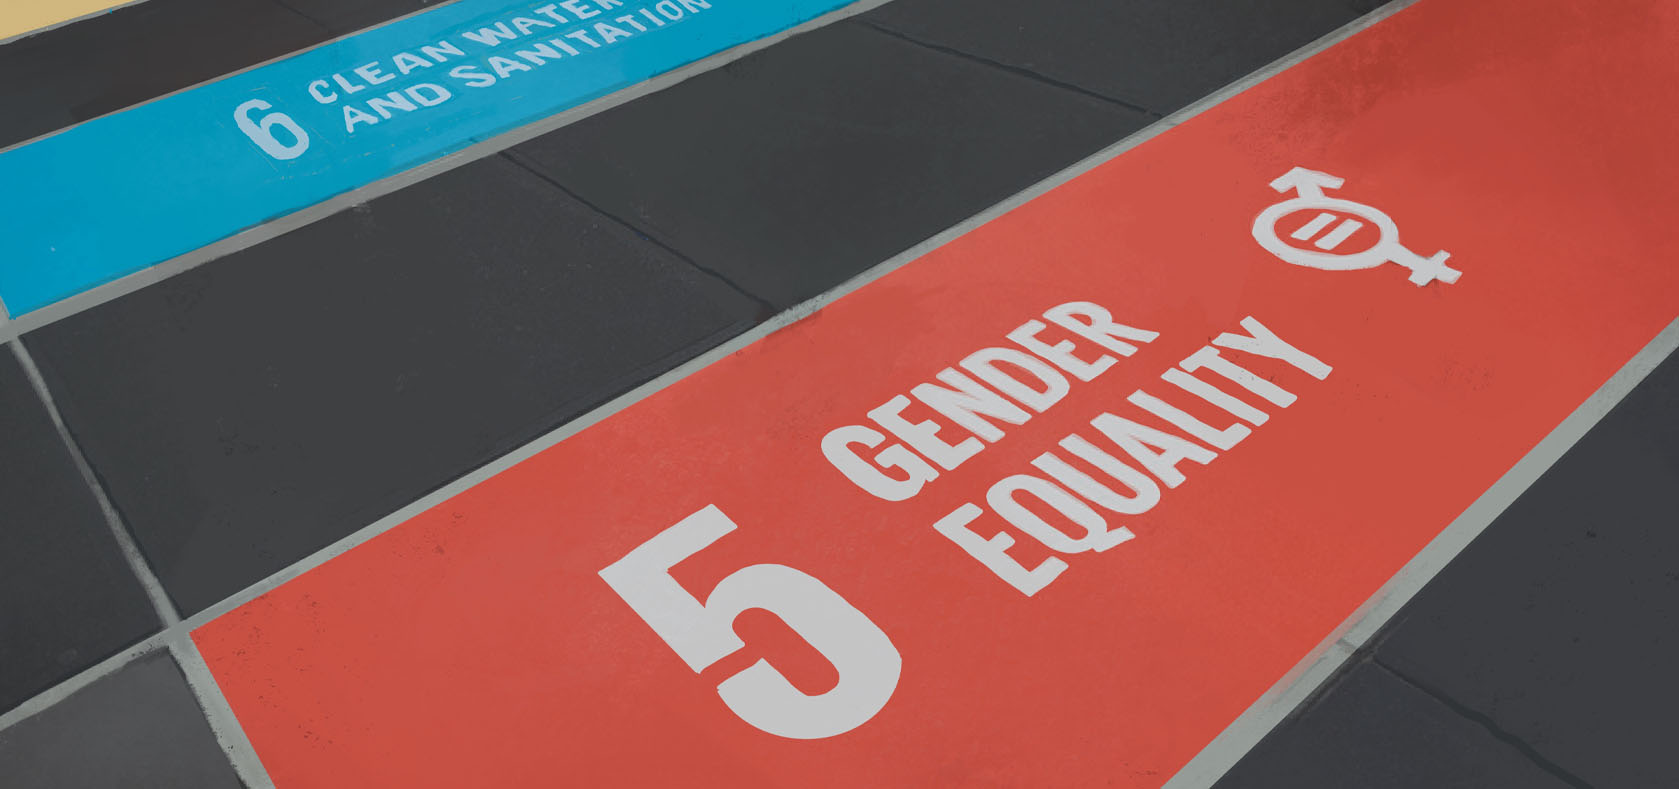 SDG 5 banner, white text on red background; had been laid on the floor. There is an SDG 6 banner in light blue partially shown on the top